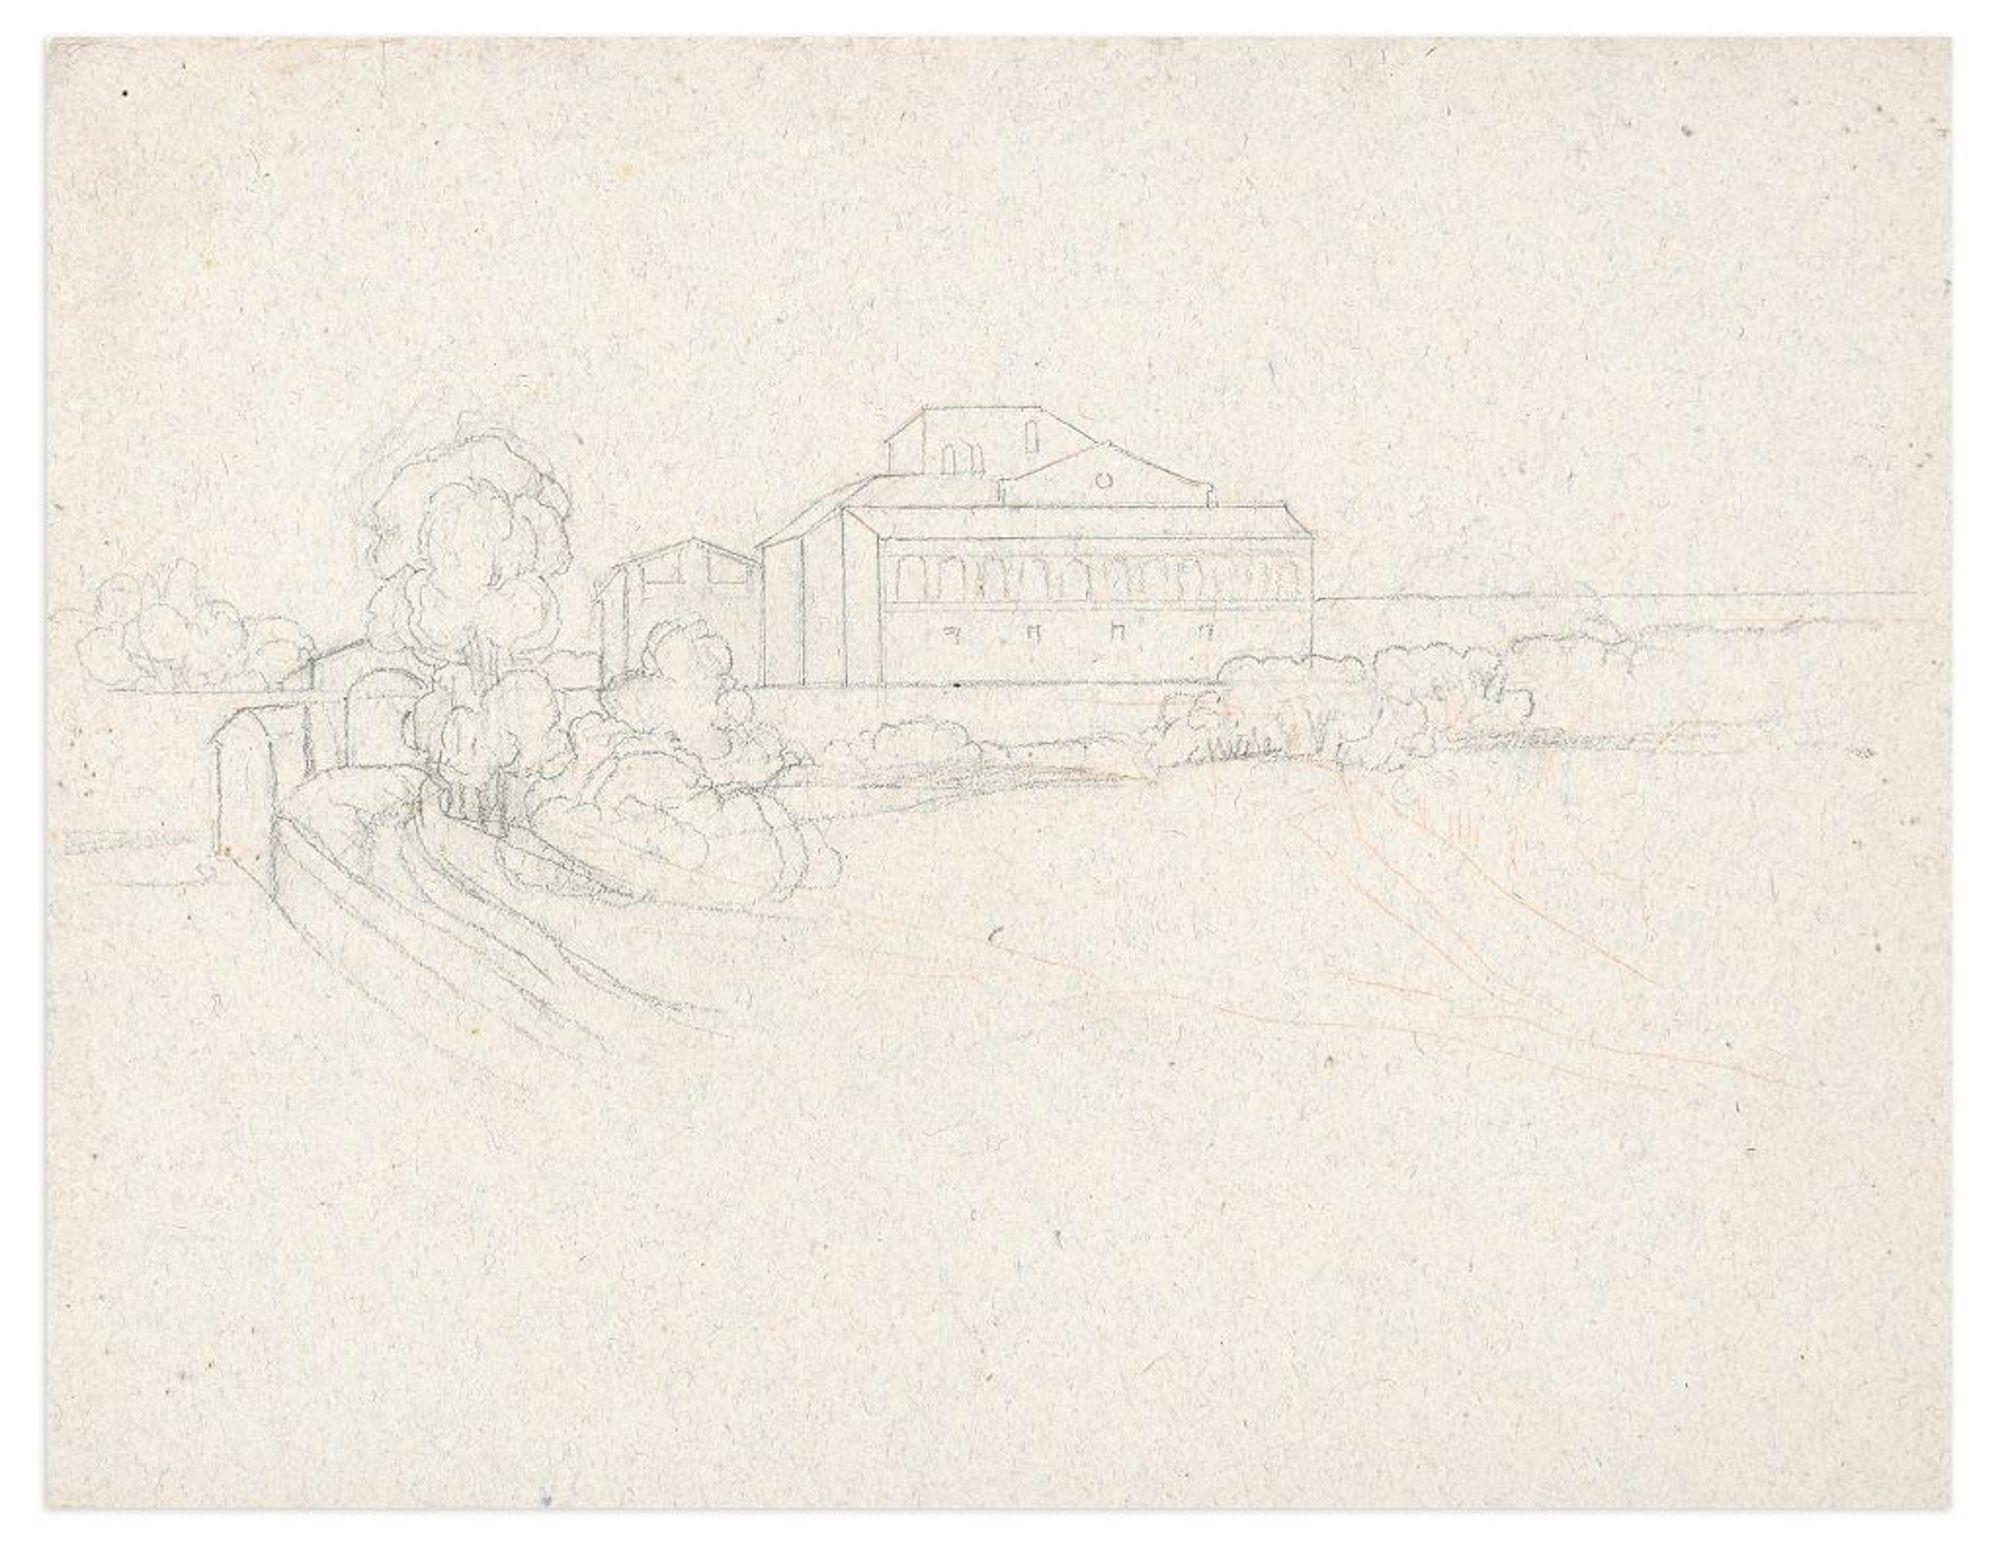 Landscape and Maternity - Pencil Drawing by M. Dumas - 1850s